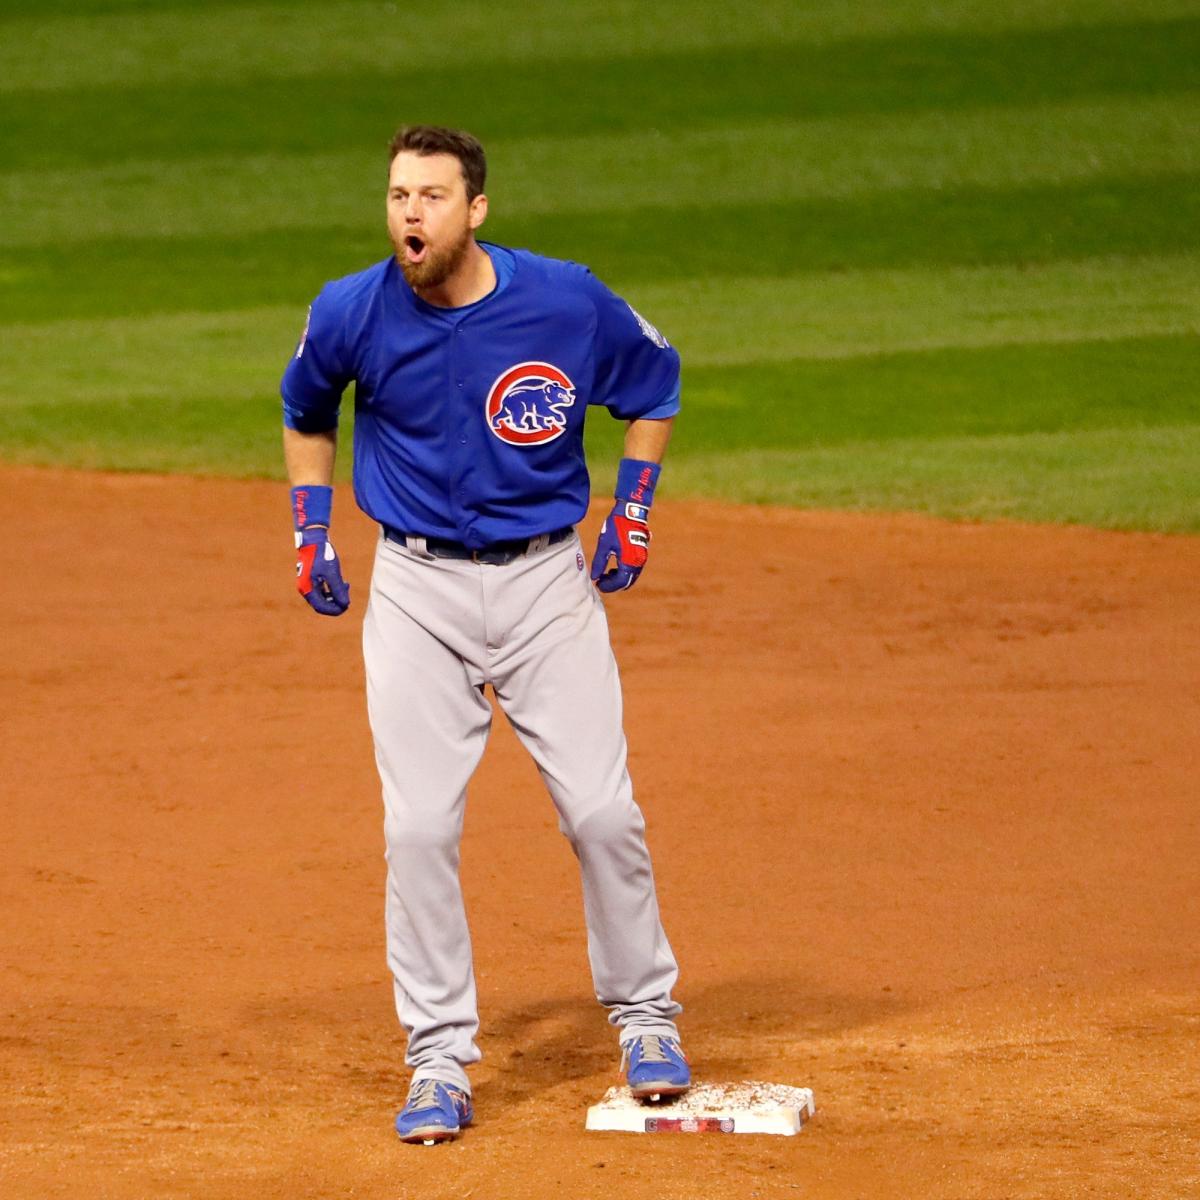 Ben Zobrist is a two-time World Series winner since leaving A's